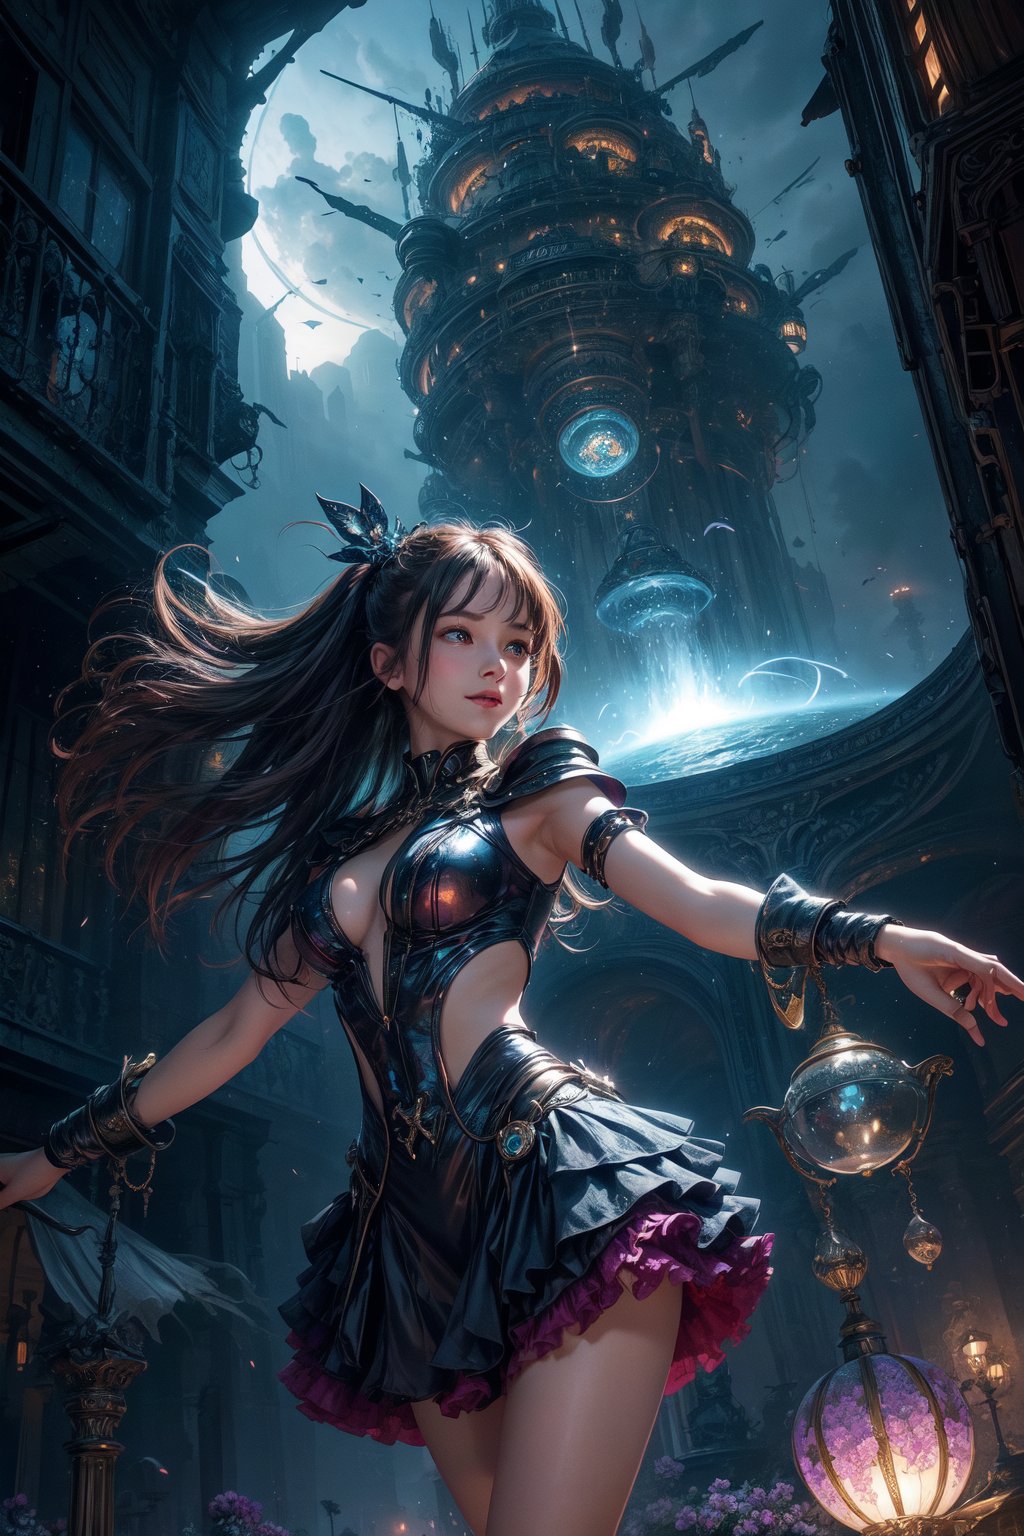 A vibrant young girl, radiating charm, holds a bouquet of vivid flowers while standing in an enchanting landscape reminiscent of Wonderland. In the backdrop, a futuristic alien city towers into the sky, bathed in a mystical blue glow. With a radiant smile and open arms, the girl seems to invite the extraterrestrial guests, presenting her own corner of magic in this fantastical sci-fi realm.